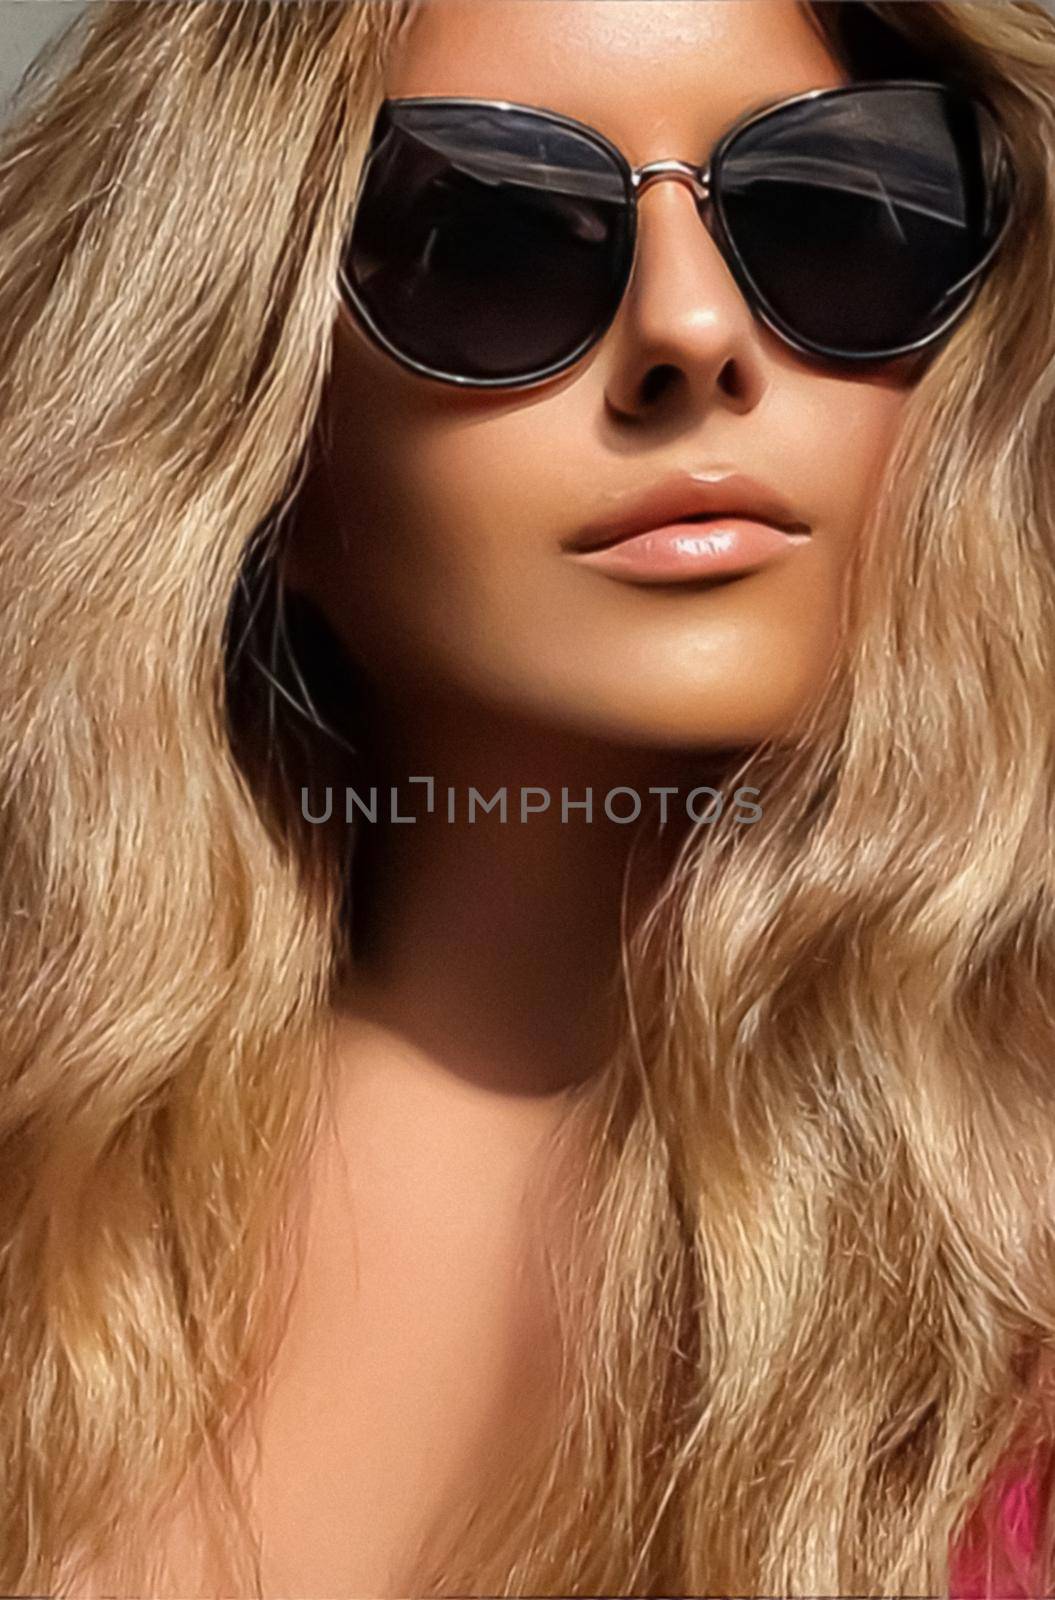 Luxury fashion, travel and beauty face portrait of young blonde woman, wearing chic sunglasses, suntanned skin and long beach waves hairstyle, summer accessory and glamour style concept